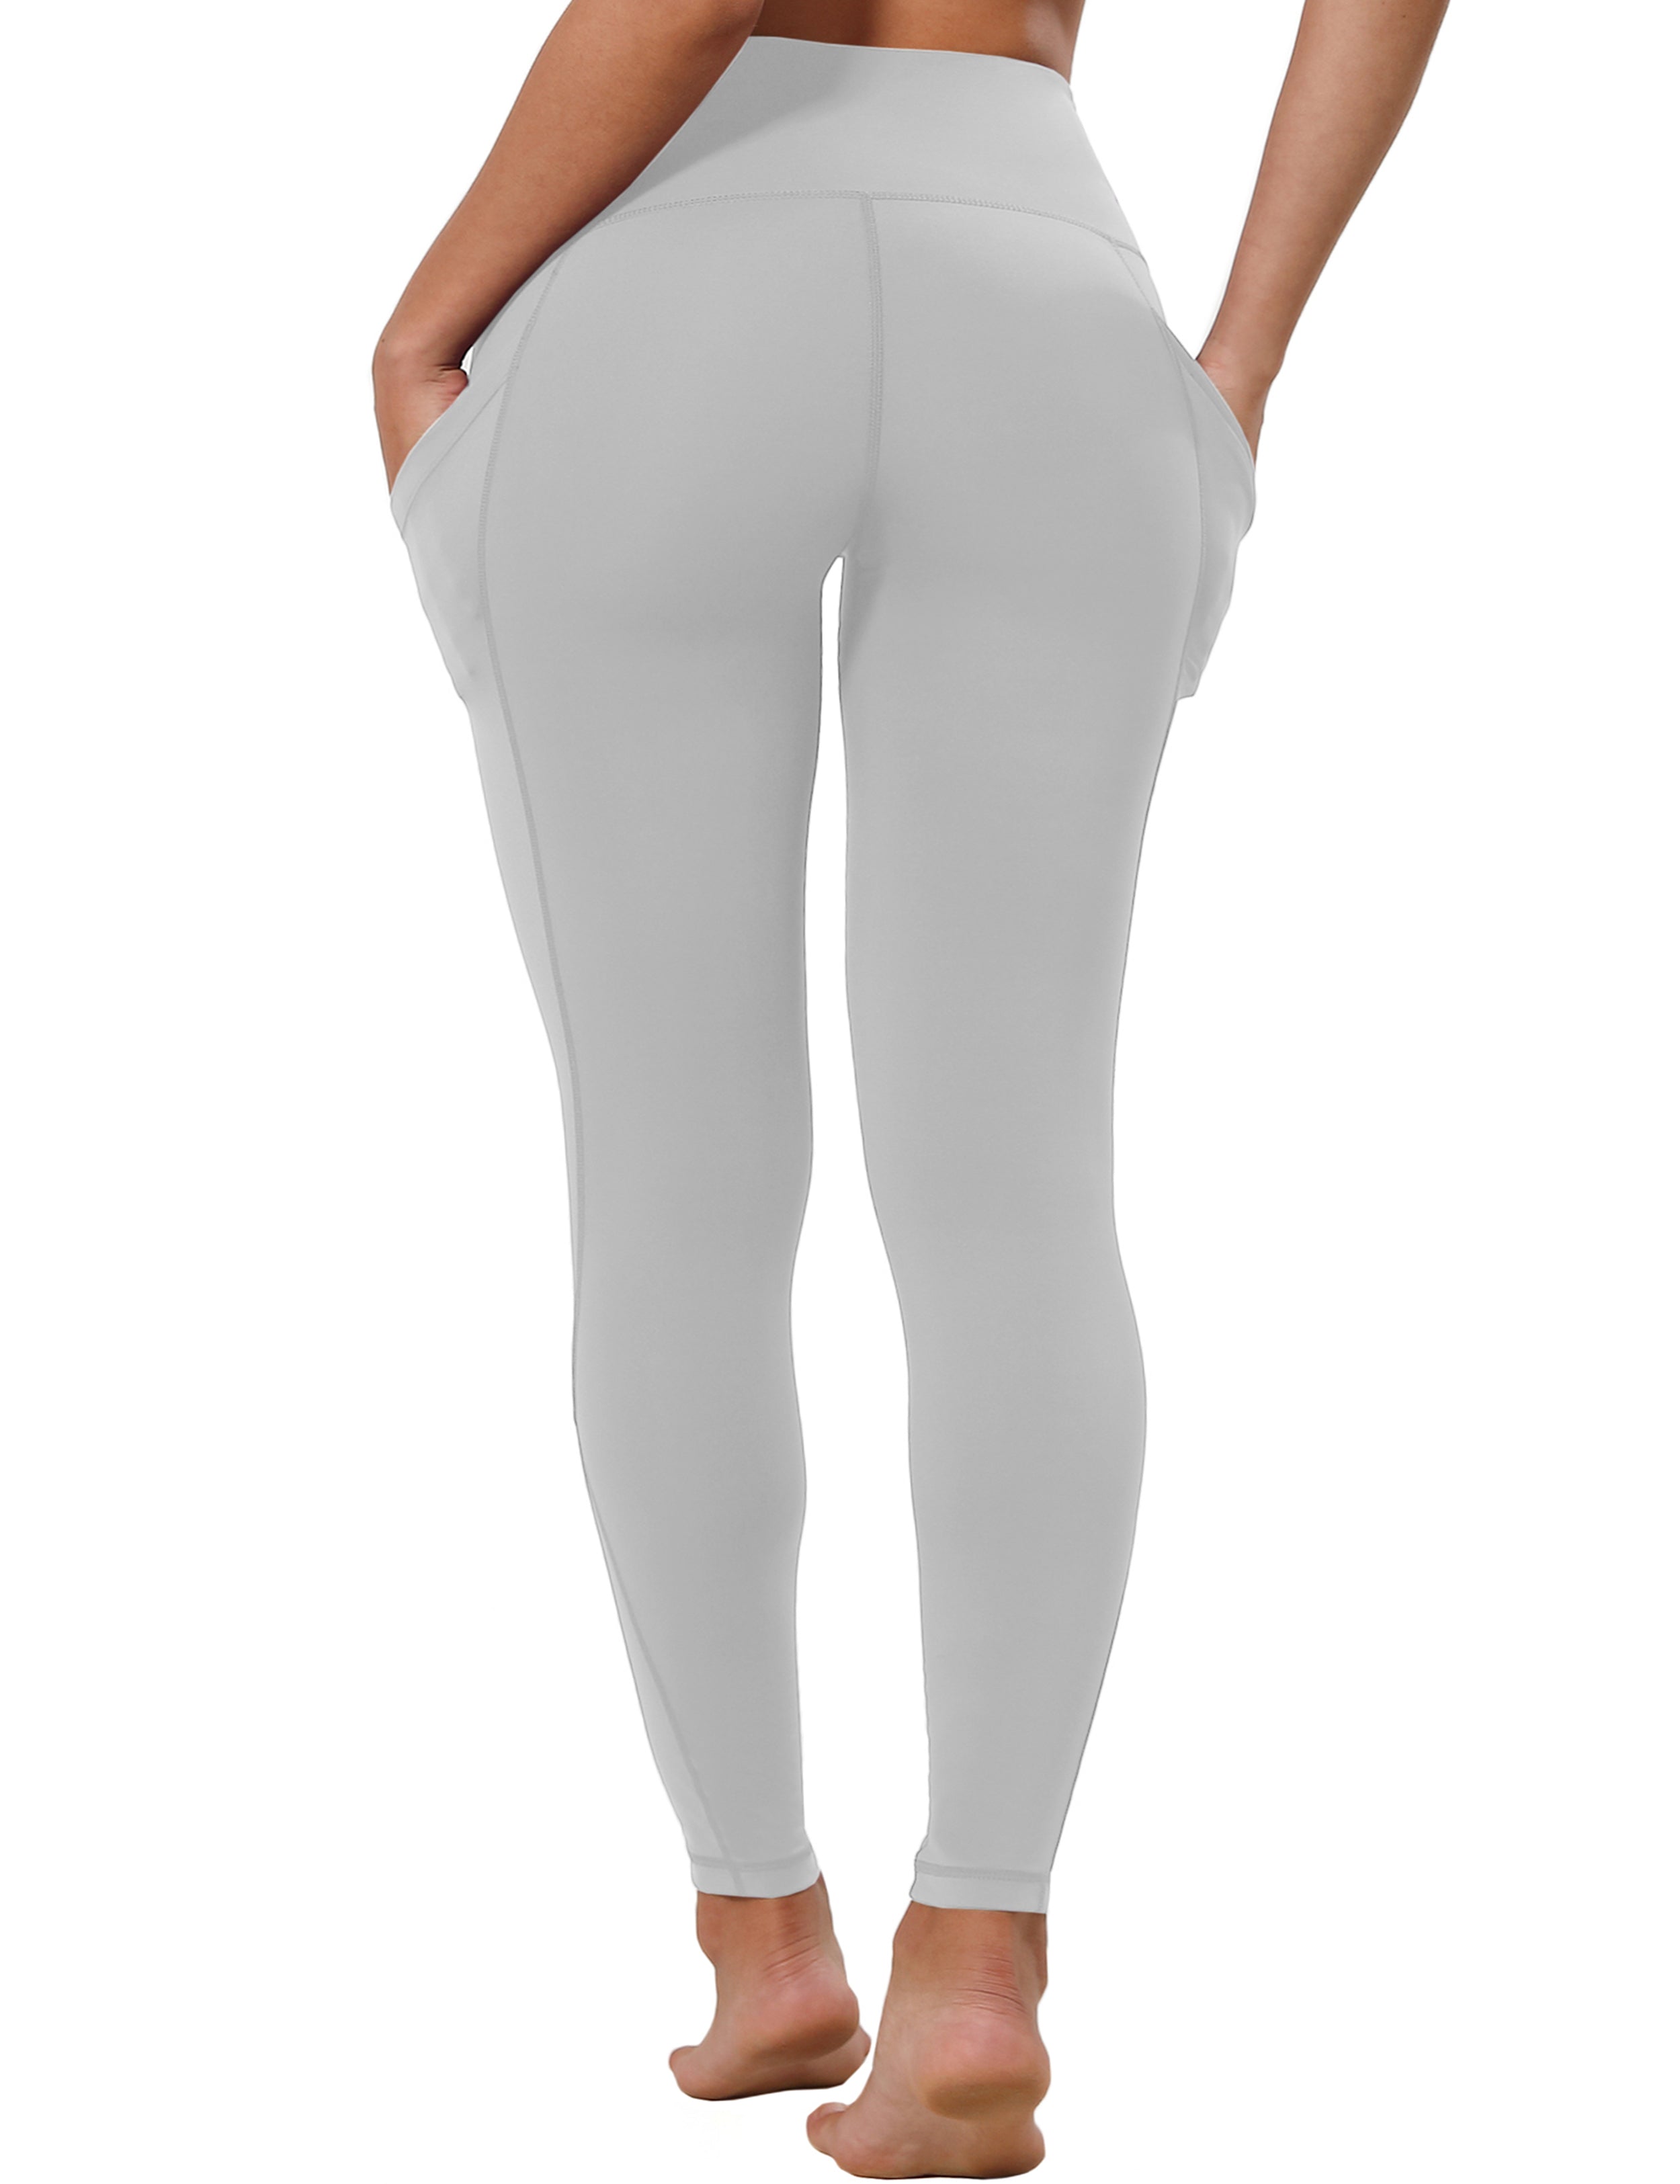 High Waist Side Pockets Running Pants lightgray 75% Nylon, 25% Spandex Fabric doesn't attract lint easily 4-way stretch No see-through Moisture-wicking Tummy control Inner pocket